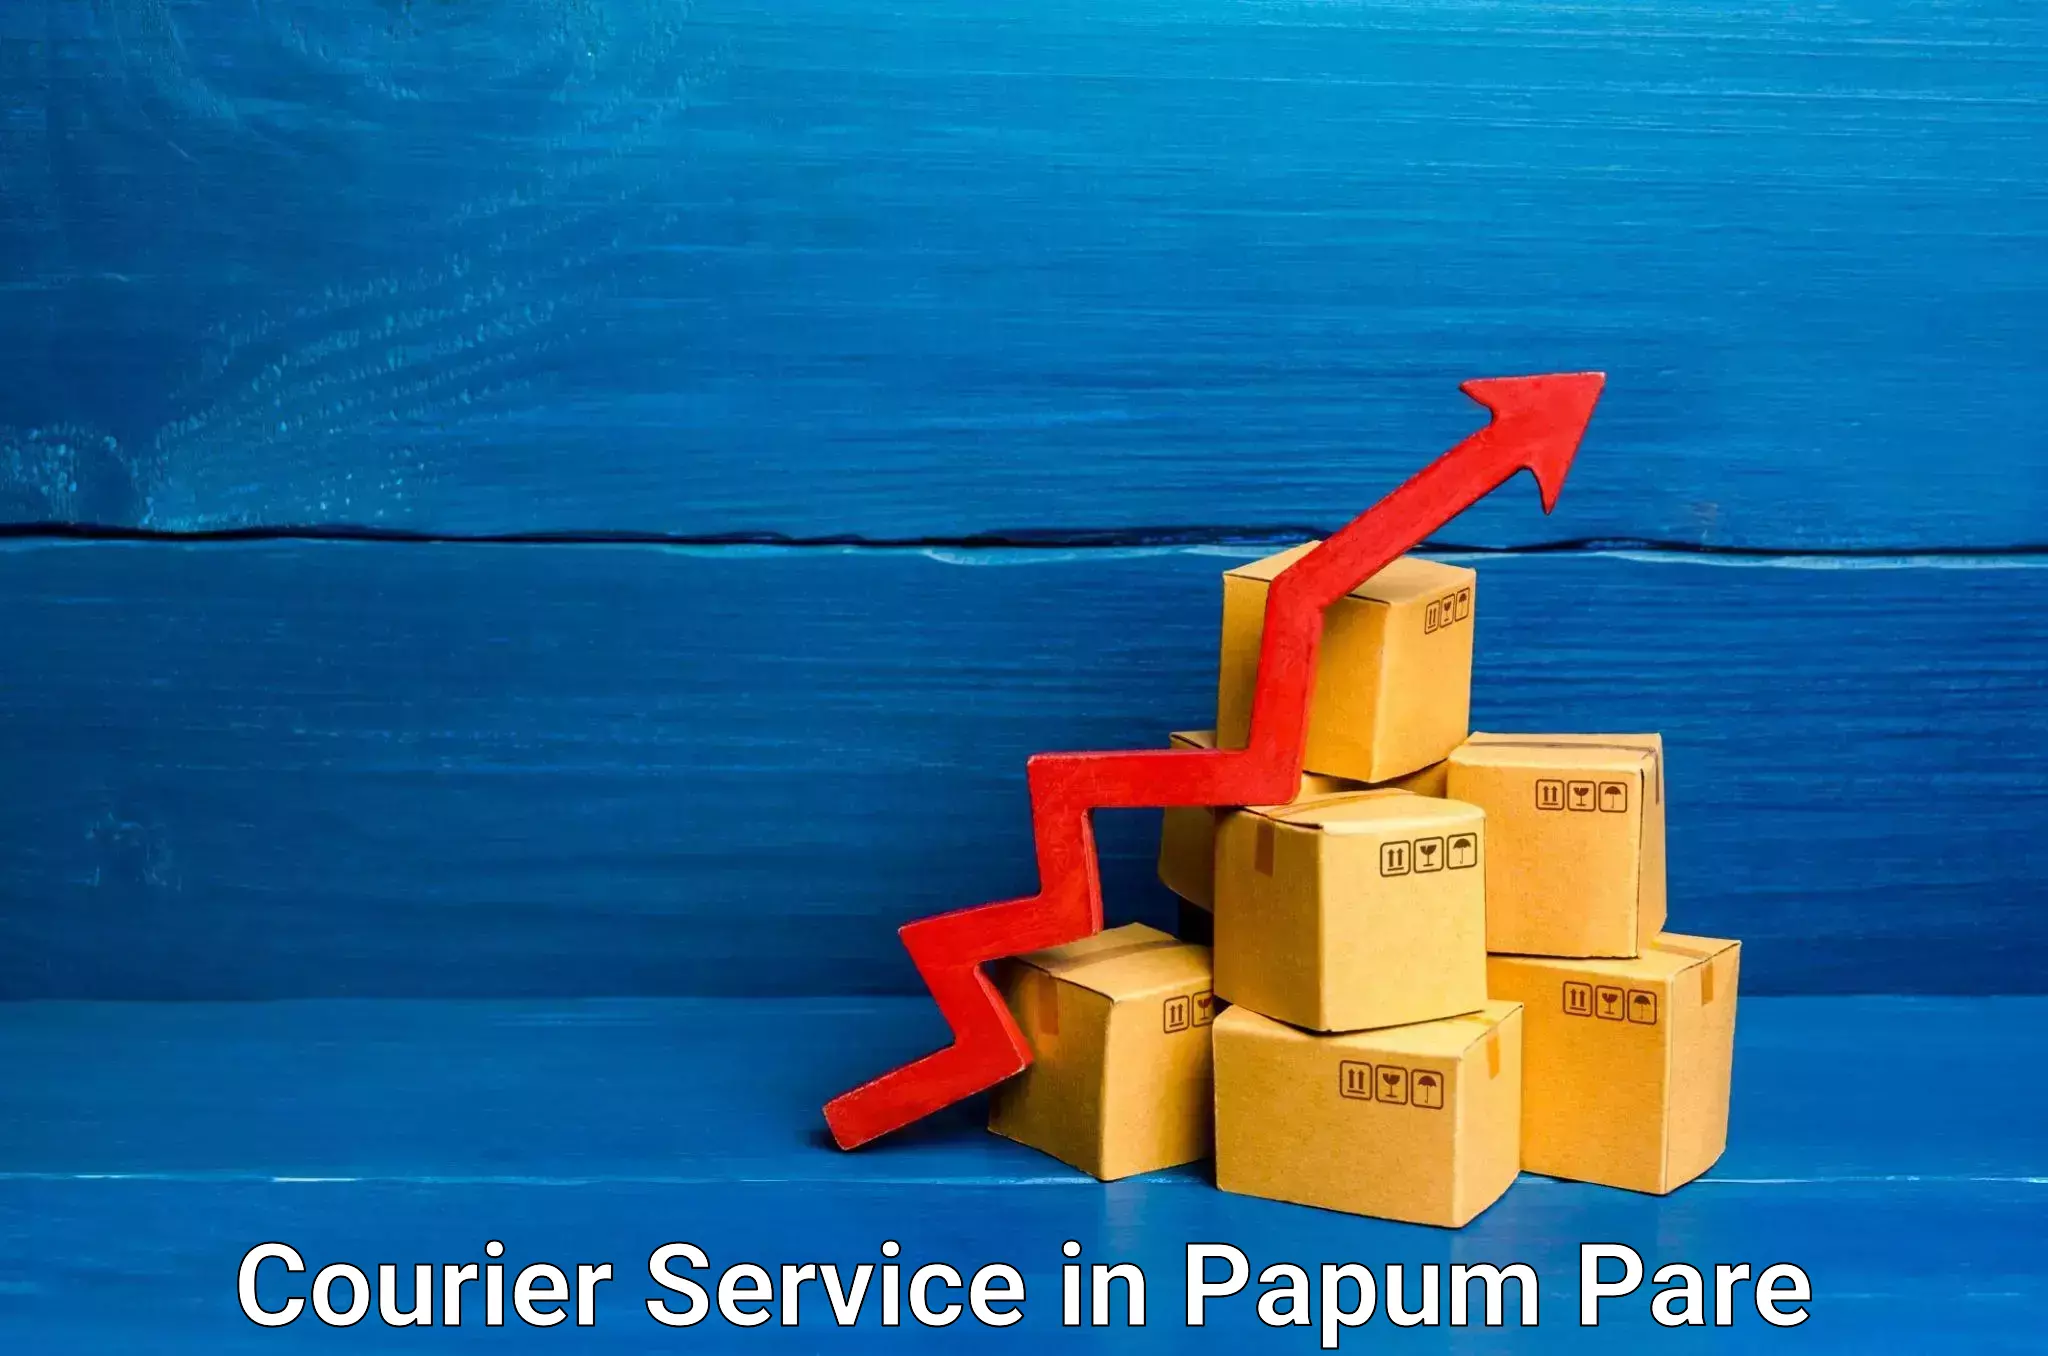 High-speed delivery in Papum Pare